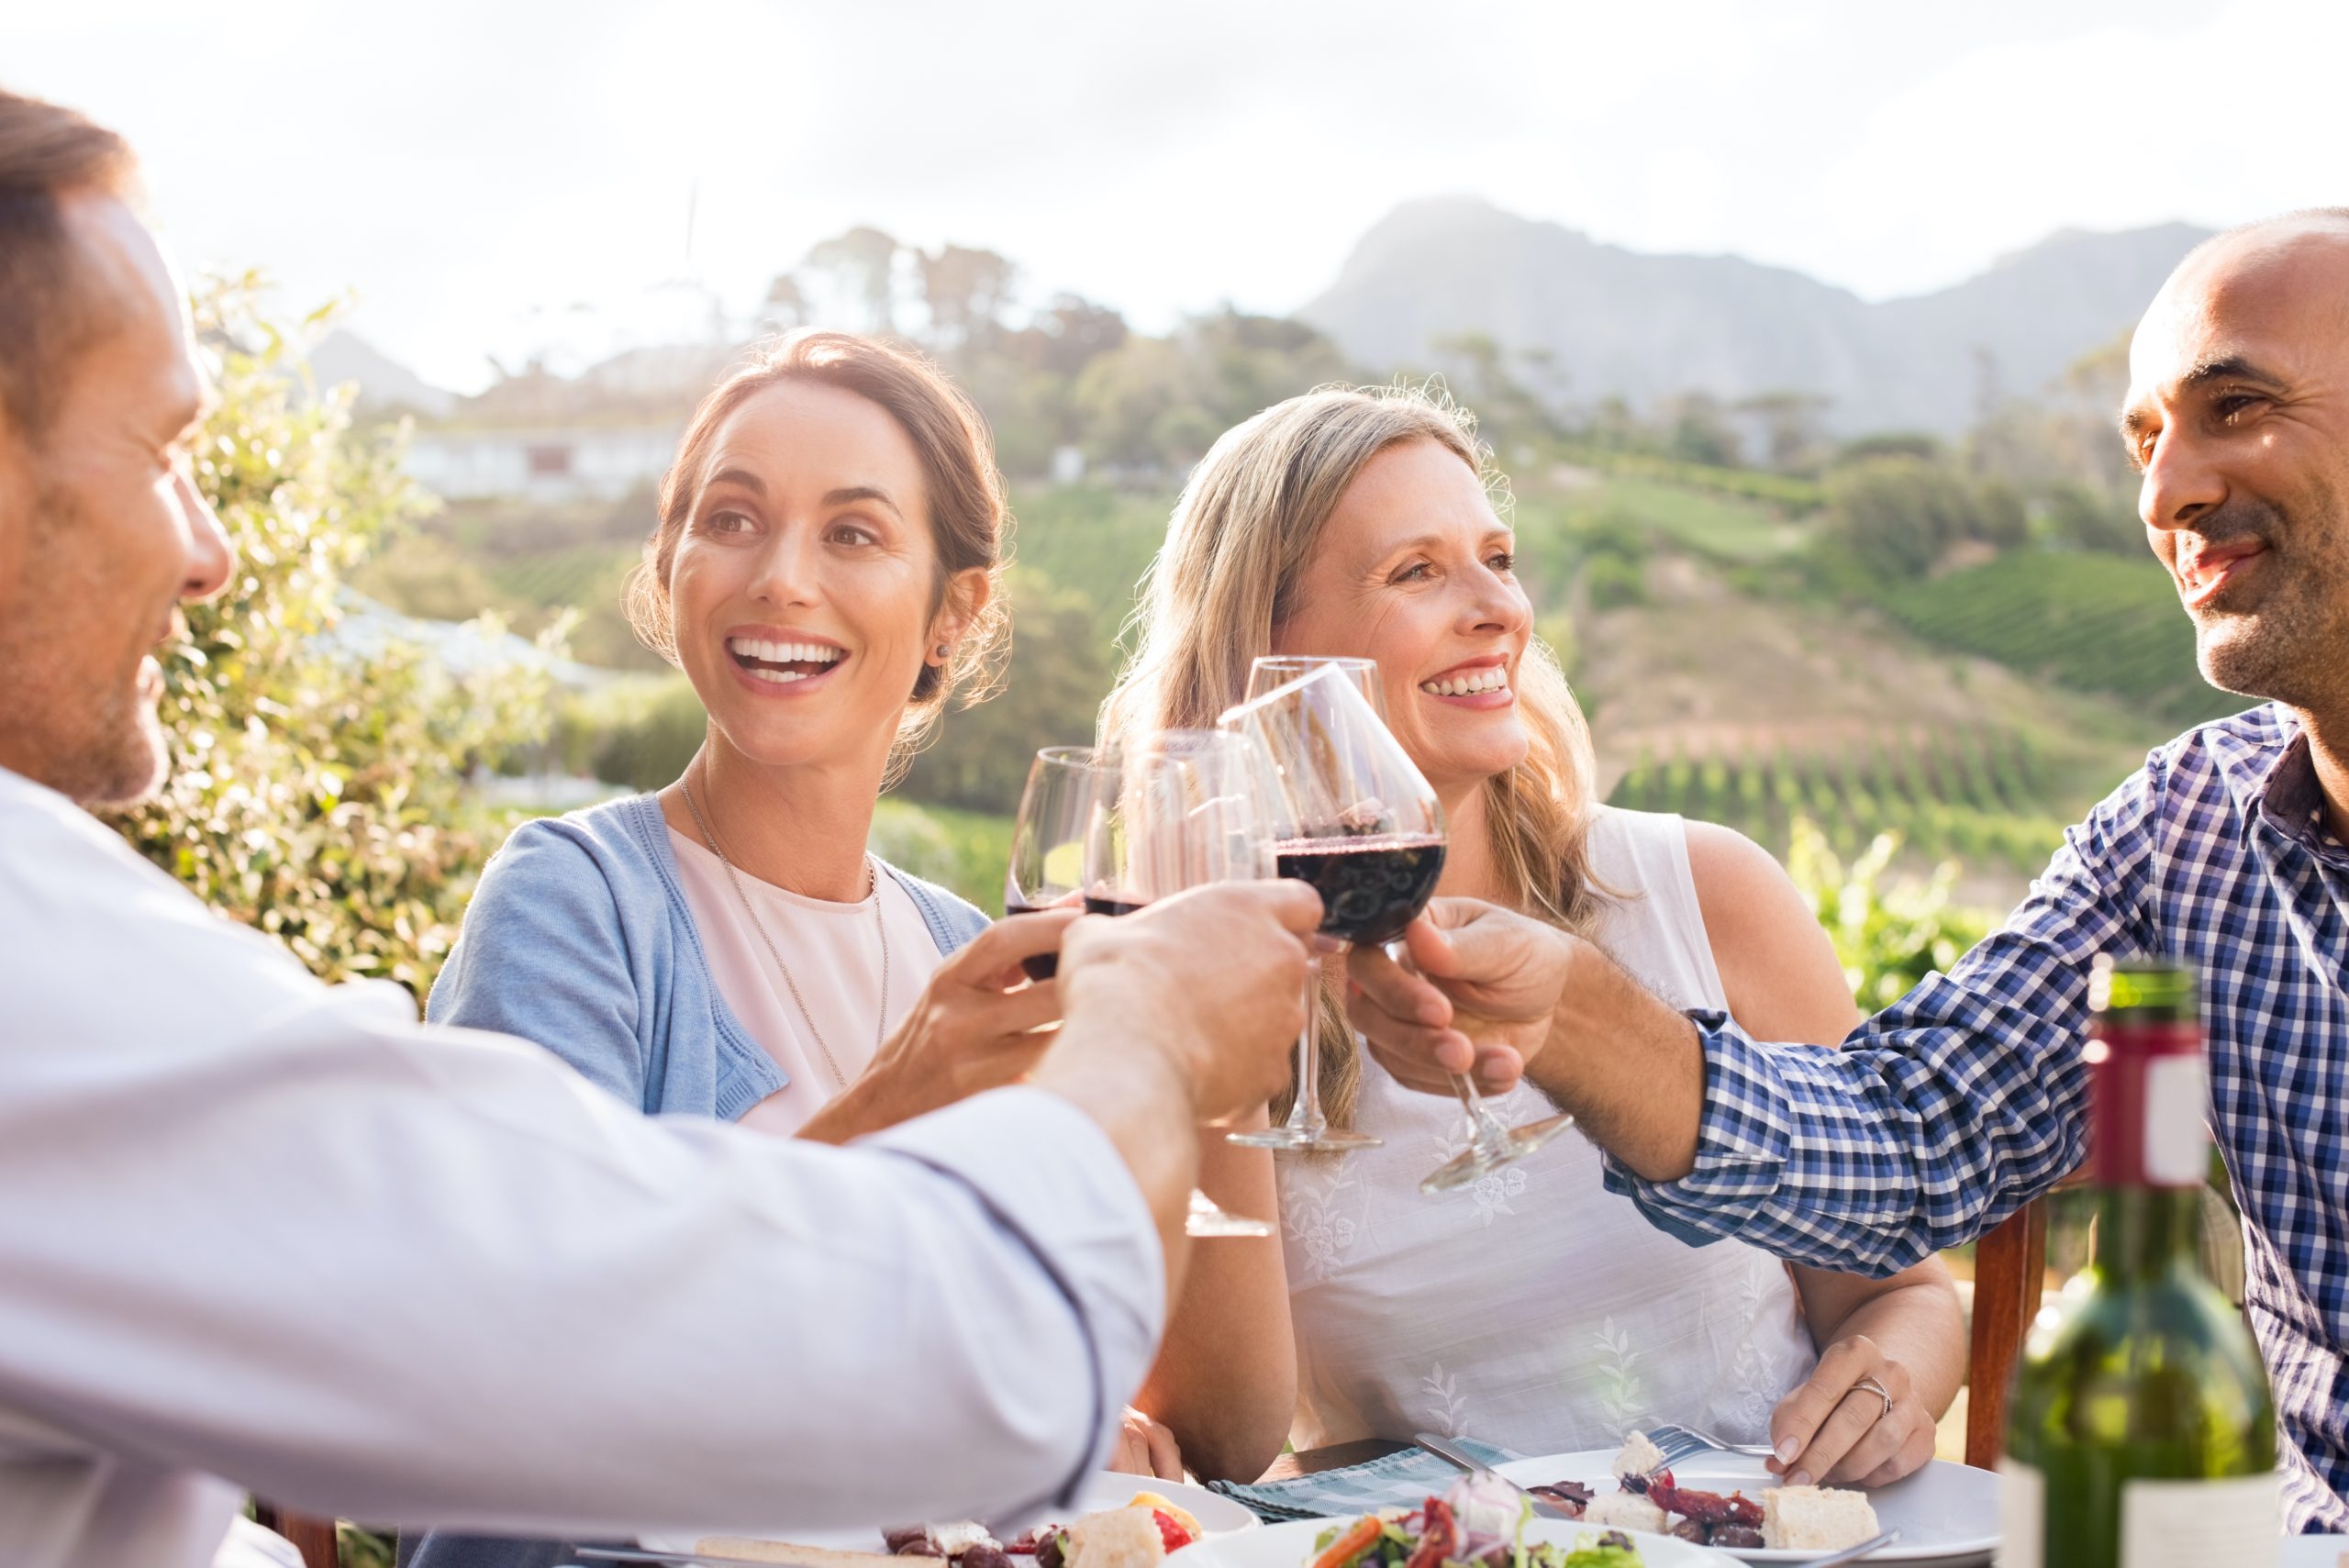 Group of middle aged men and women celebrating in a vineyard